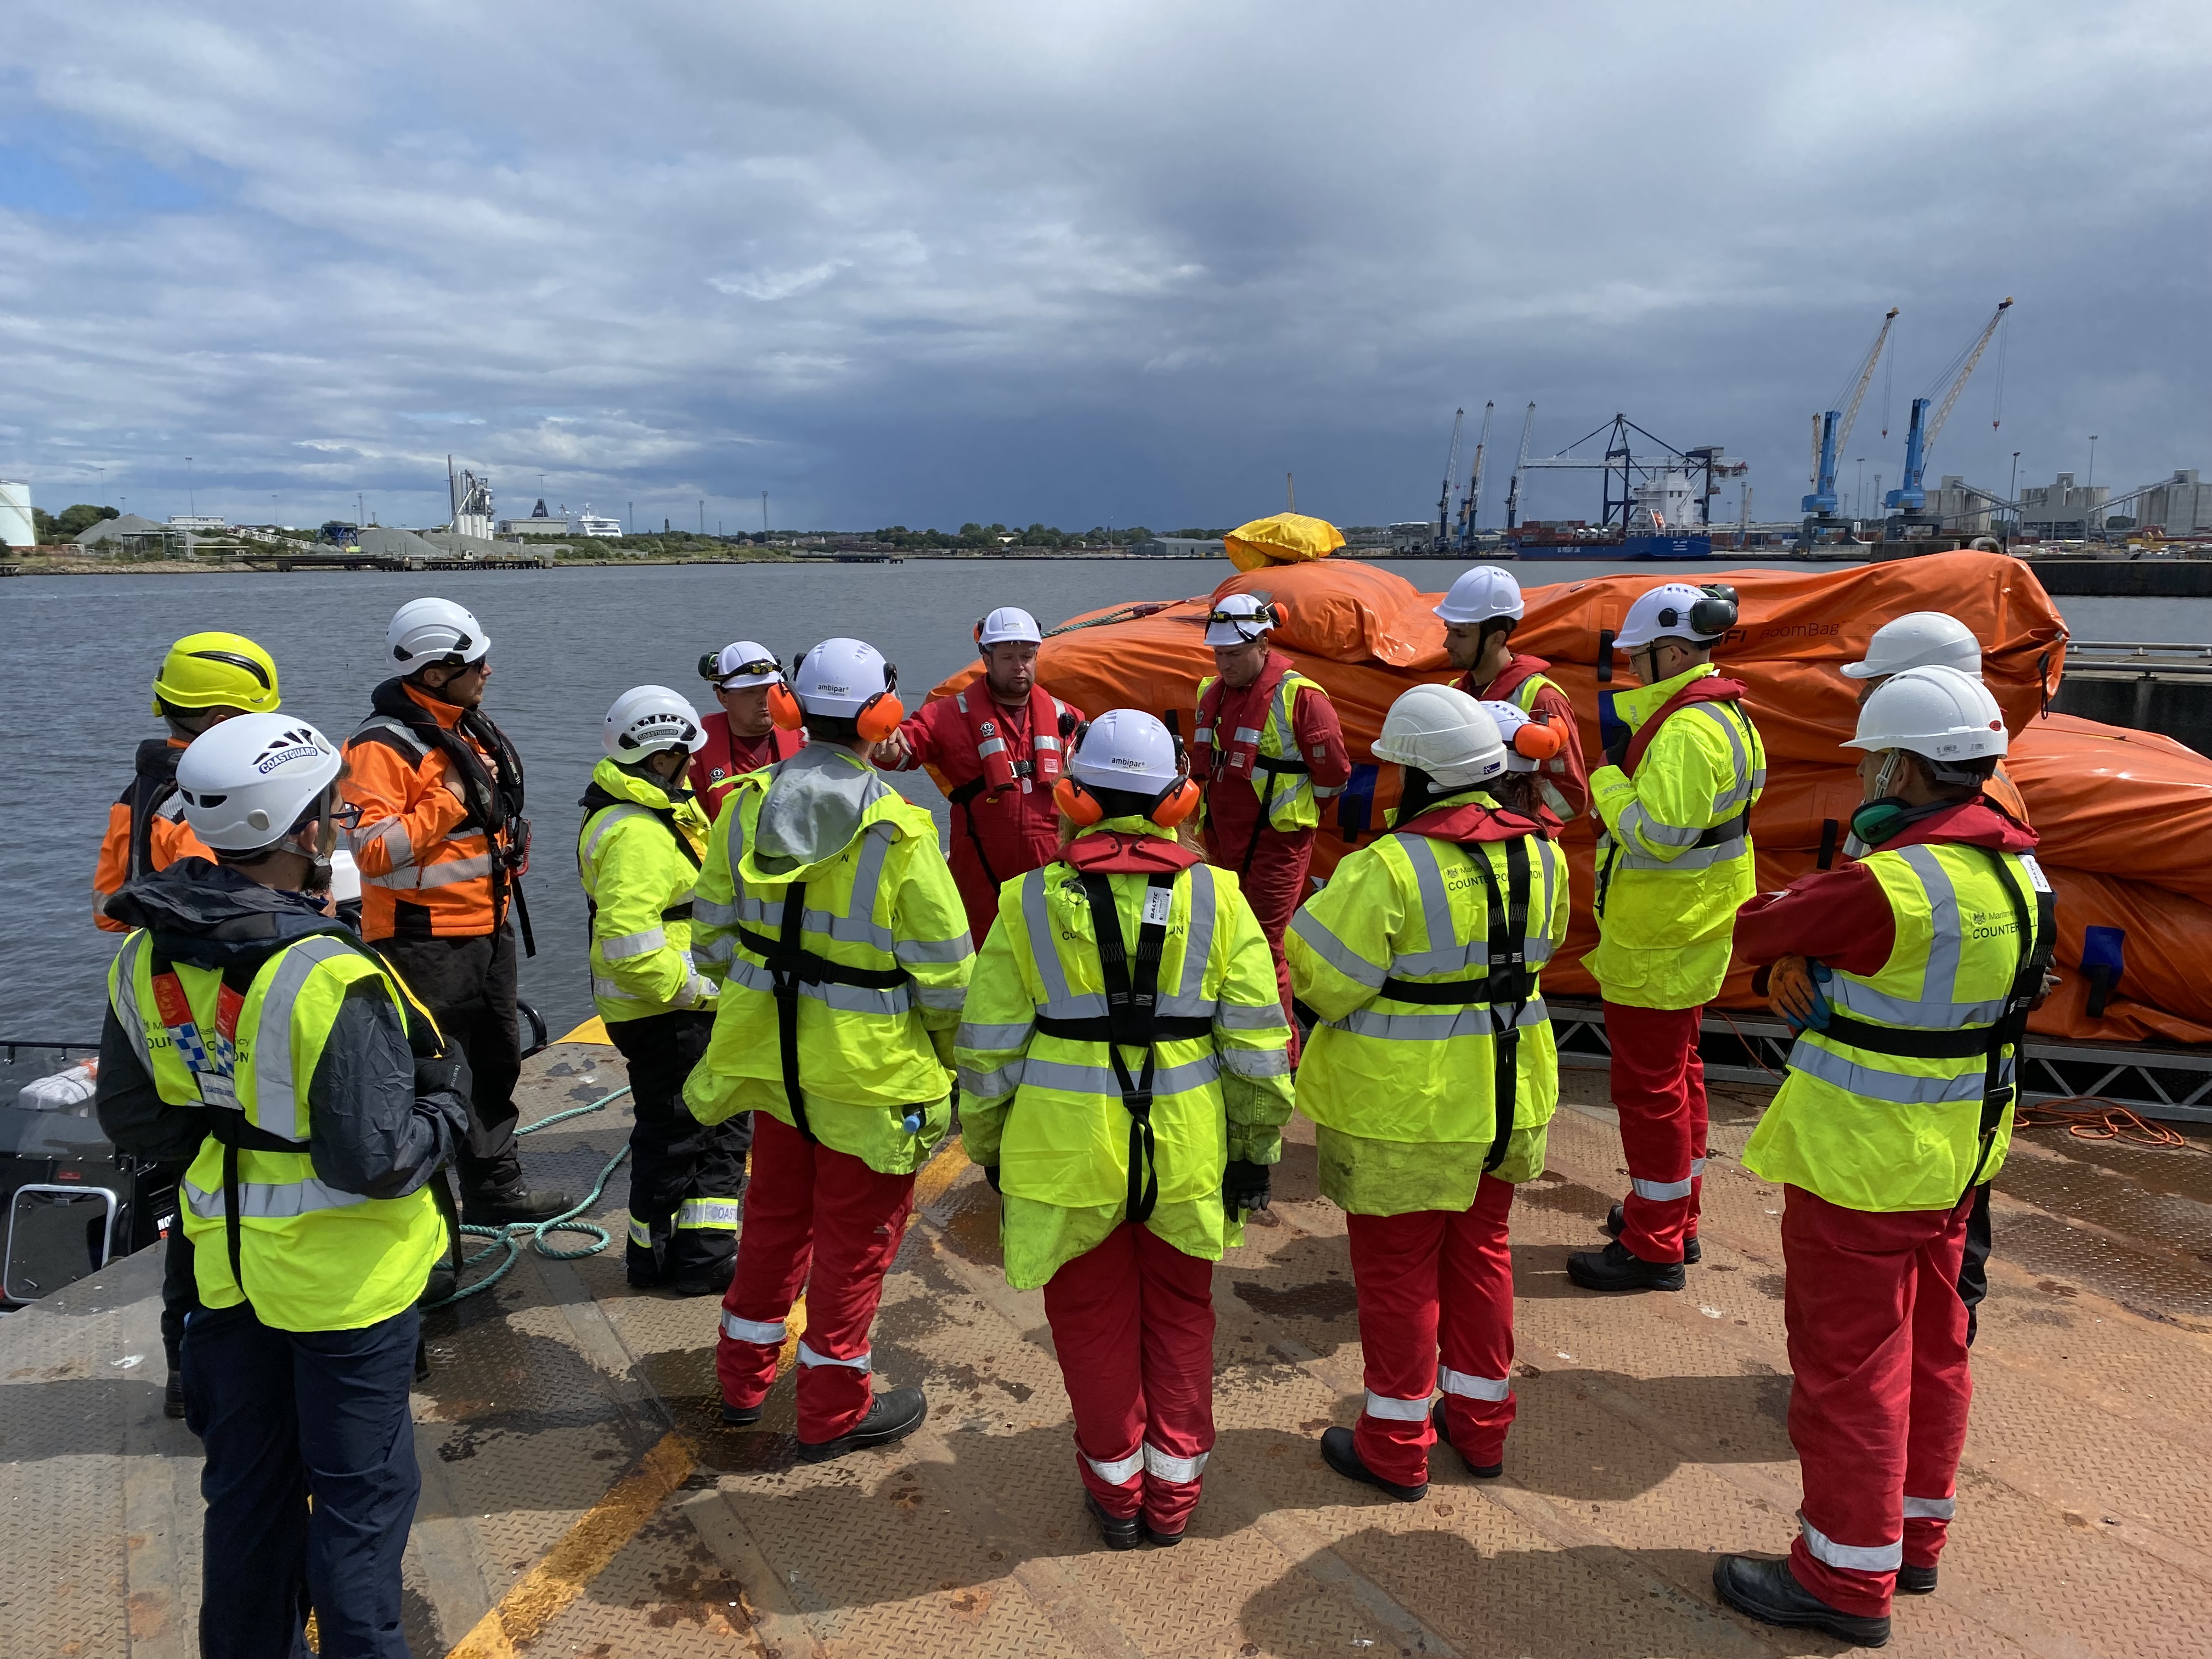 The team is briefed before going onto the water at the Port of Tyne